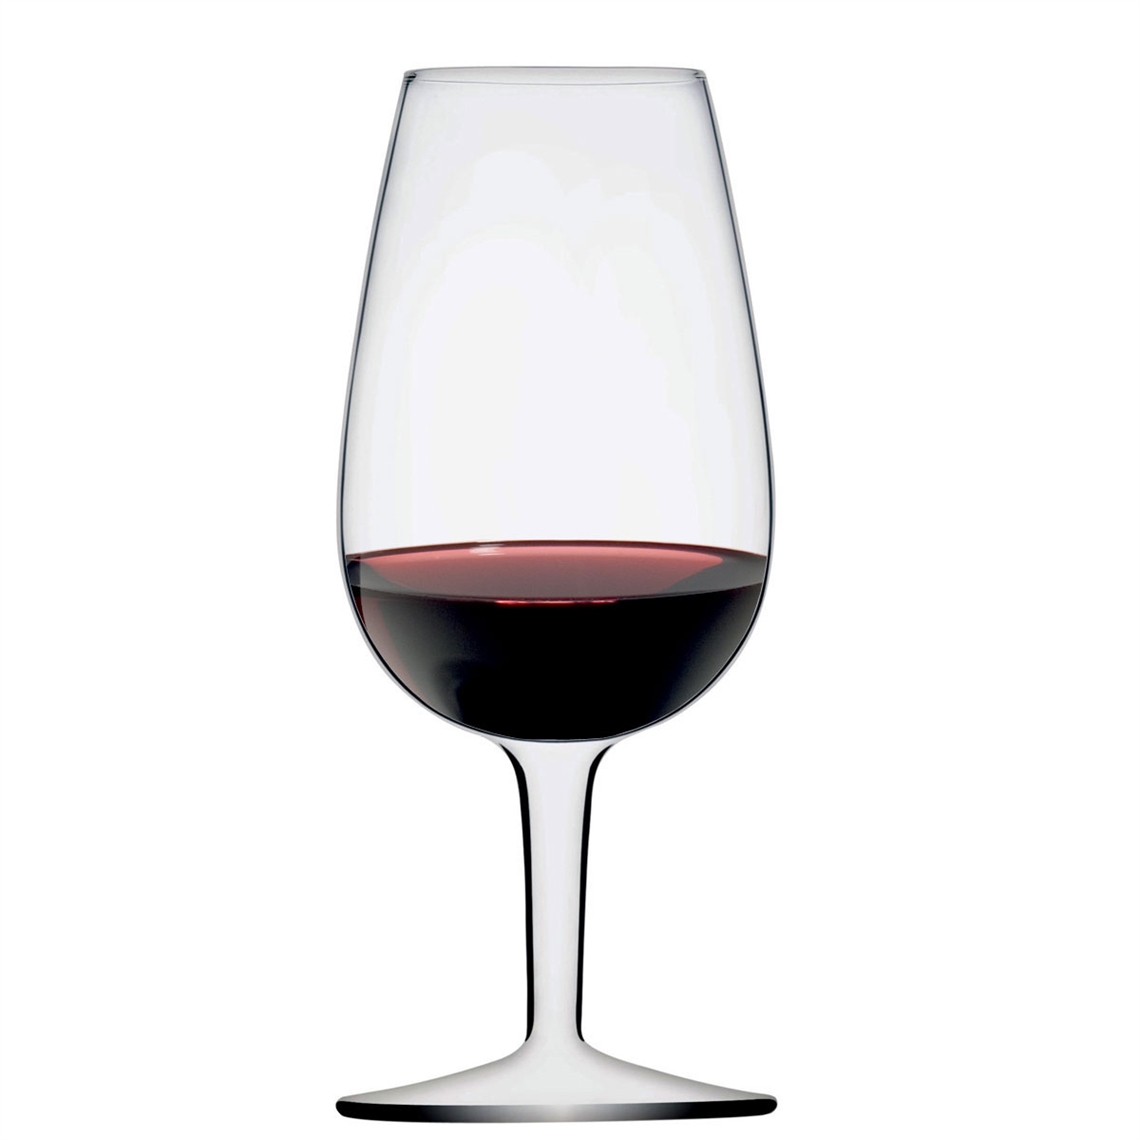 View more fortissimo from our Wine Tasting Glasses range